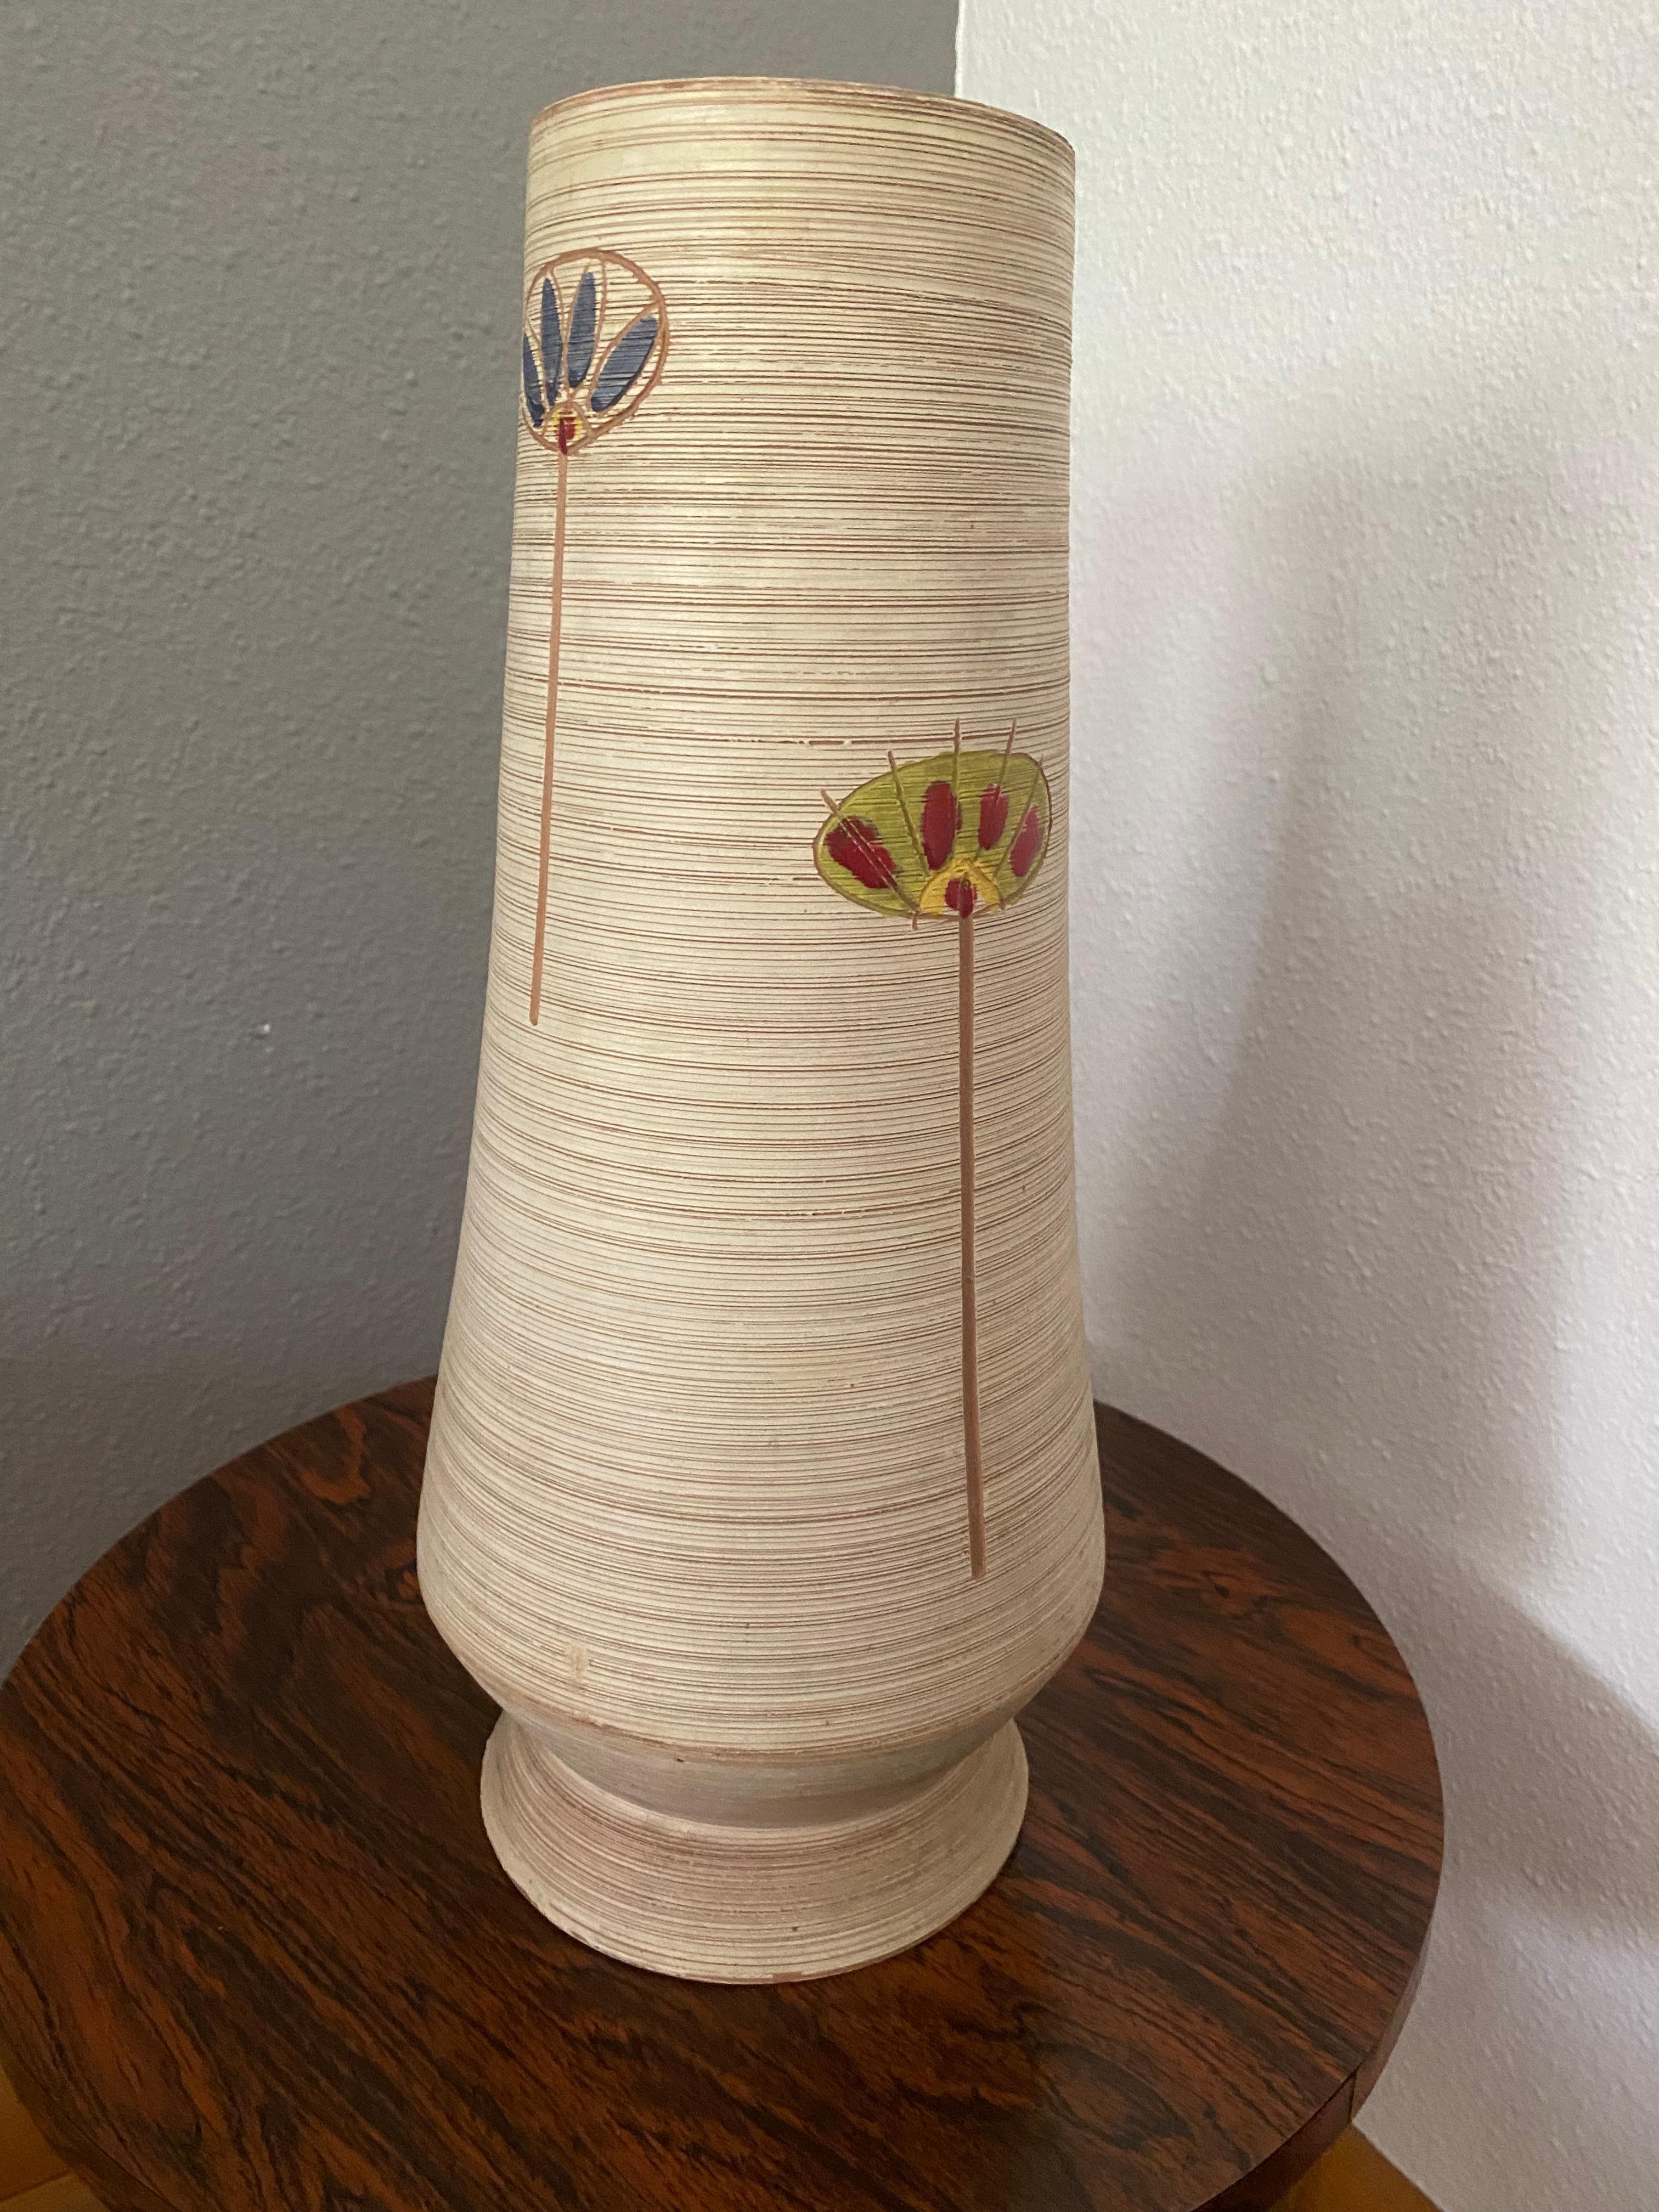 Midcentury Fratelli Fanciullacci Italy Vase In Fair Condition For Sale In Waddinxveen, ZH